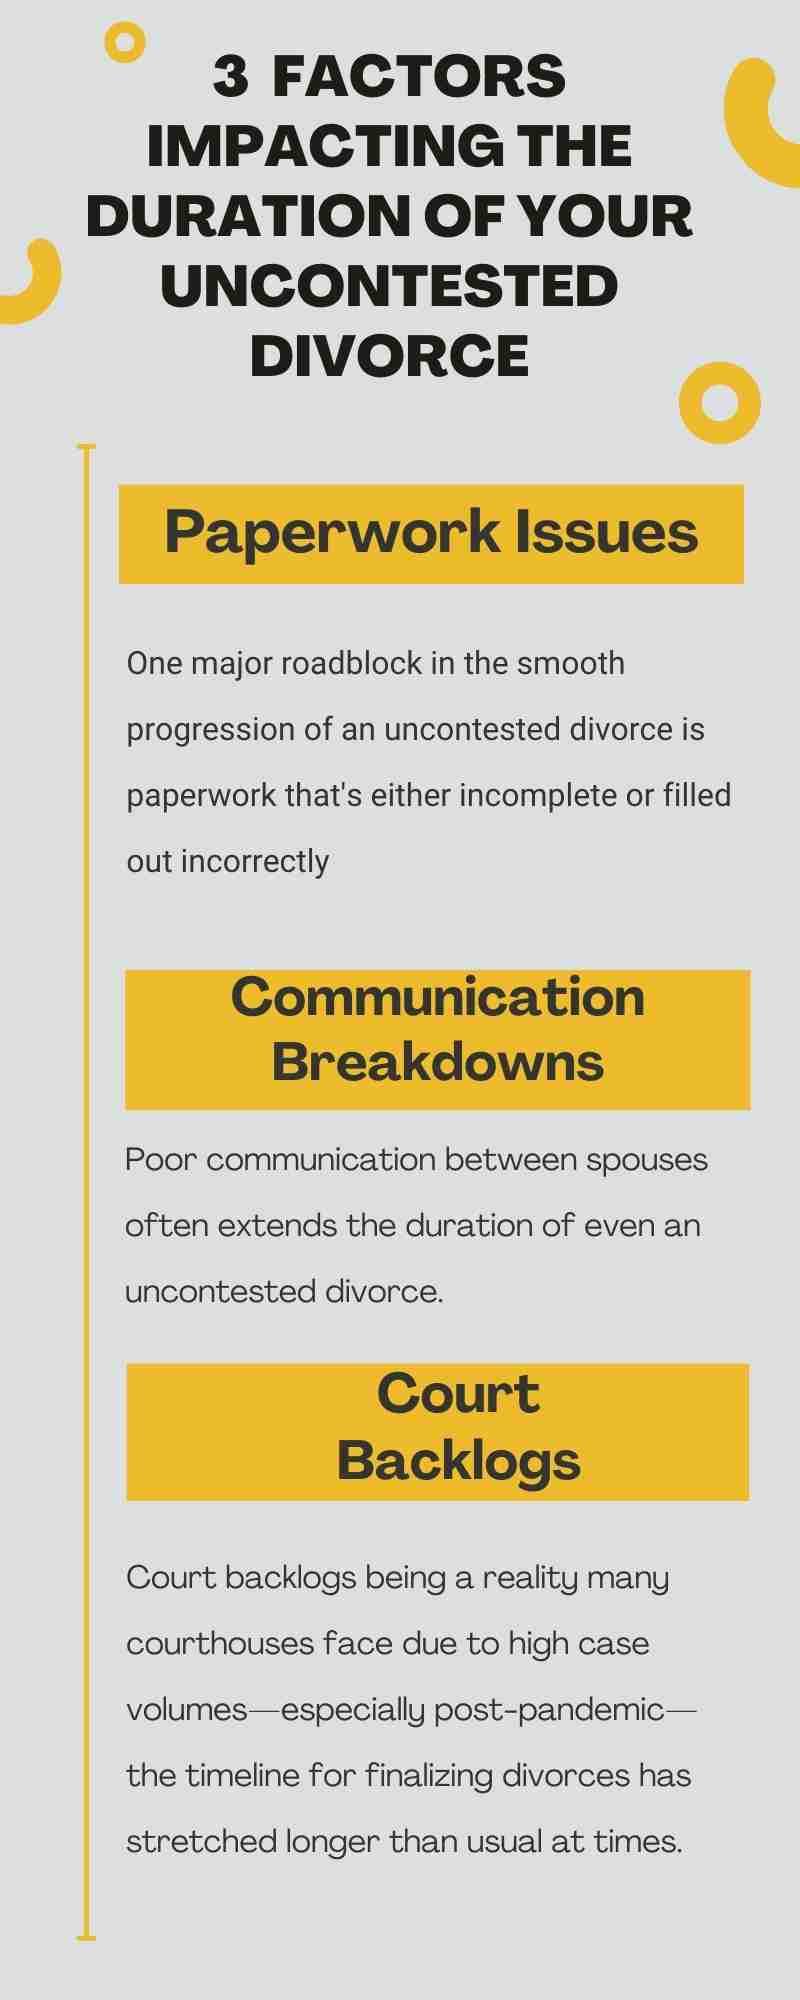 An infographic titled "3 Factors Impacting the Duration of Your Uncontested Divorce" highlights Paperwork Issues, Communication Breakdowns, and Court Backlogs 